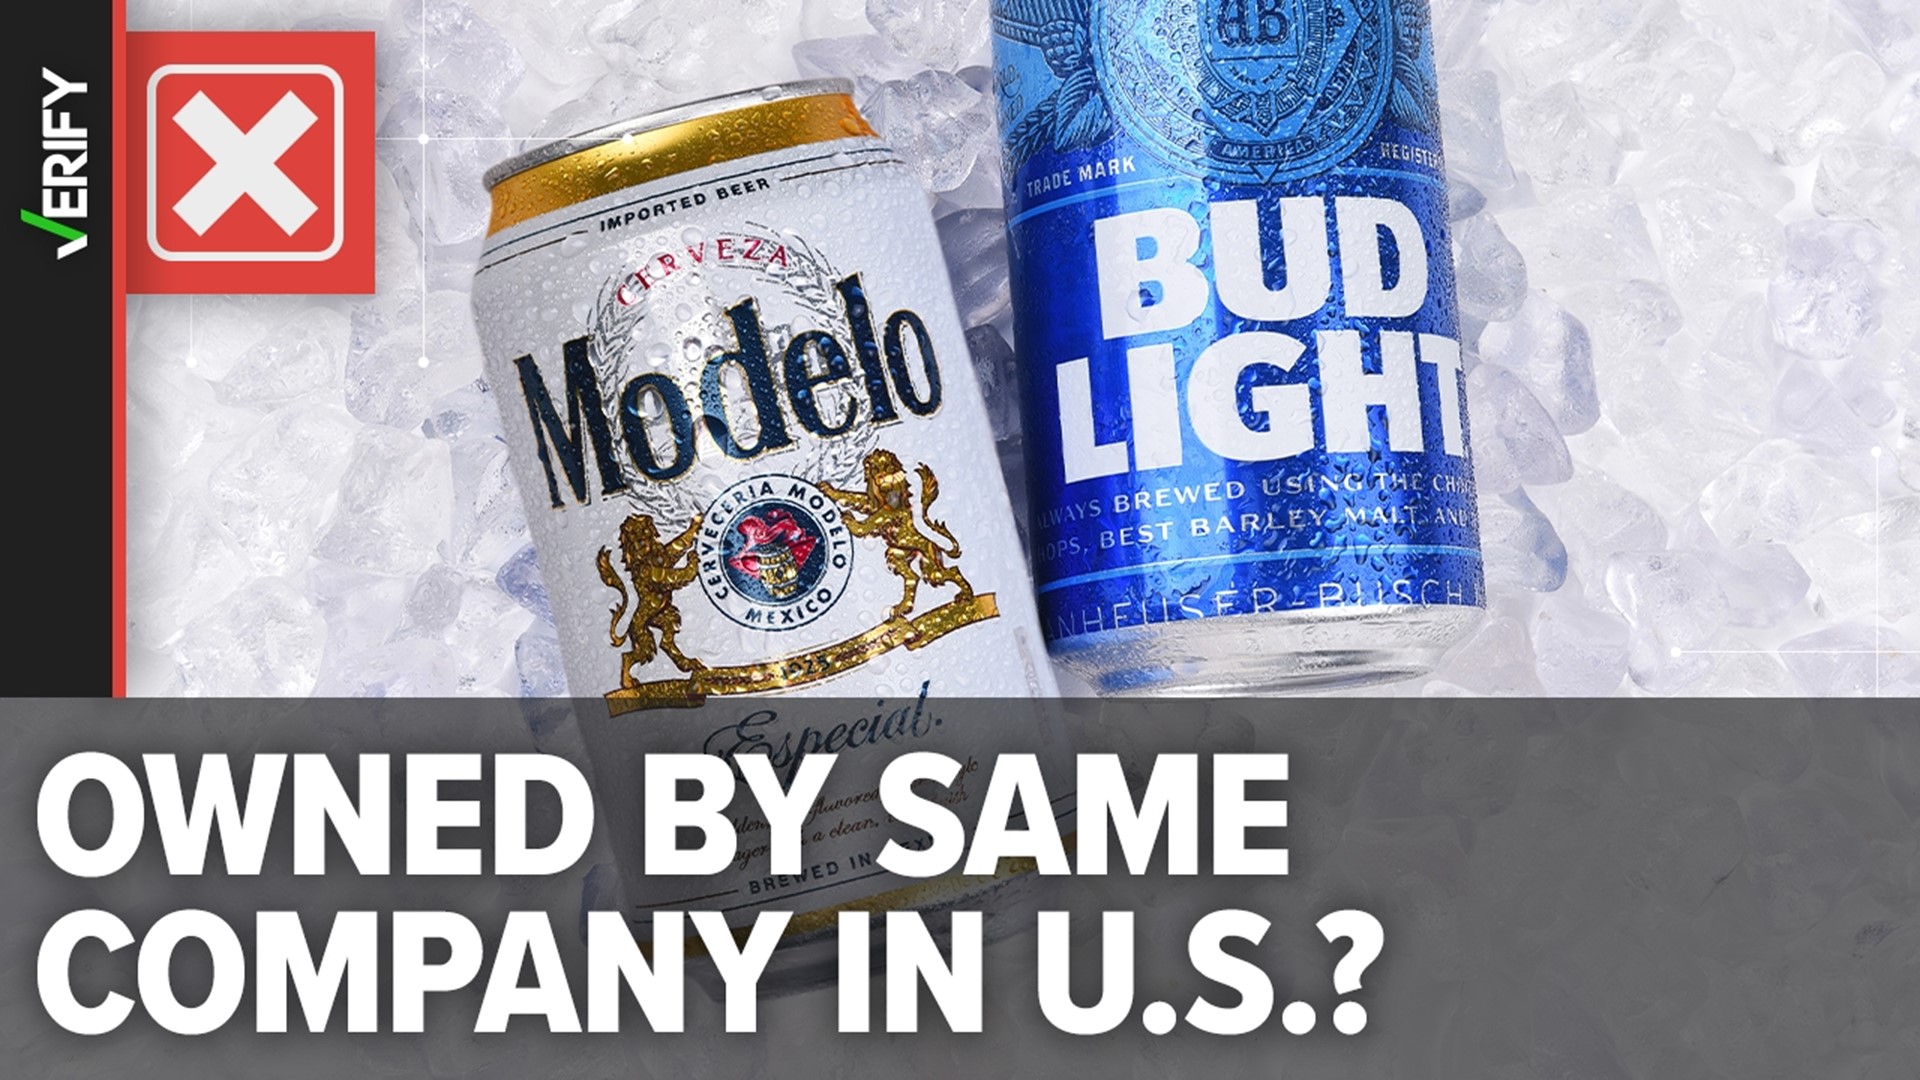 Bud Light’s parent company AB InBev does not own Modelo. Constellation Brands purchased the brand due to a federal settlement agreement.